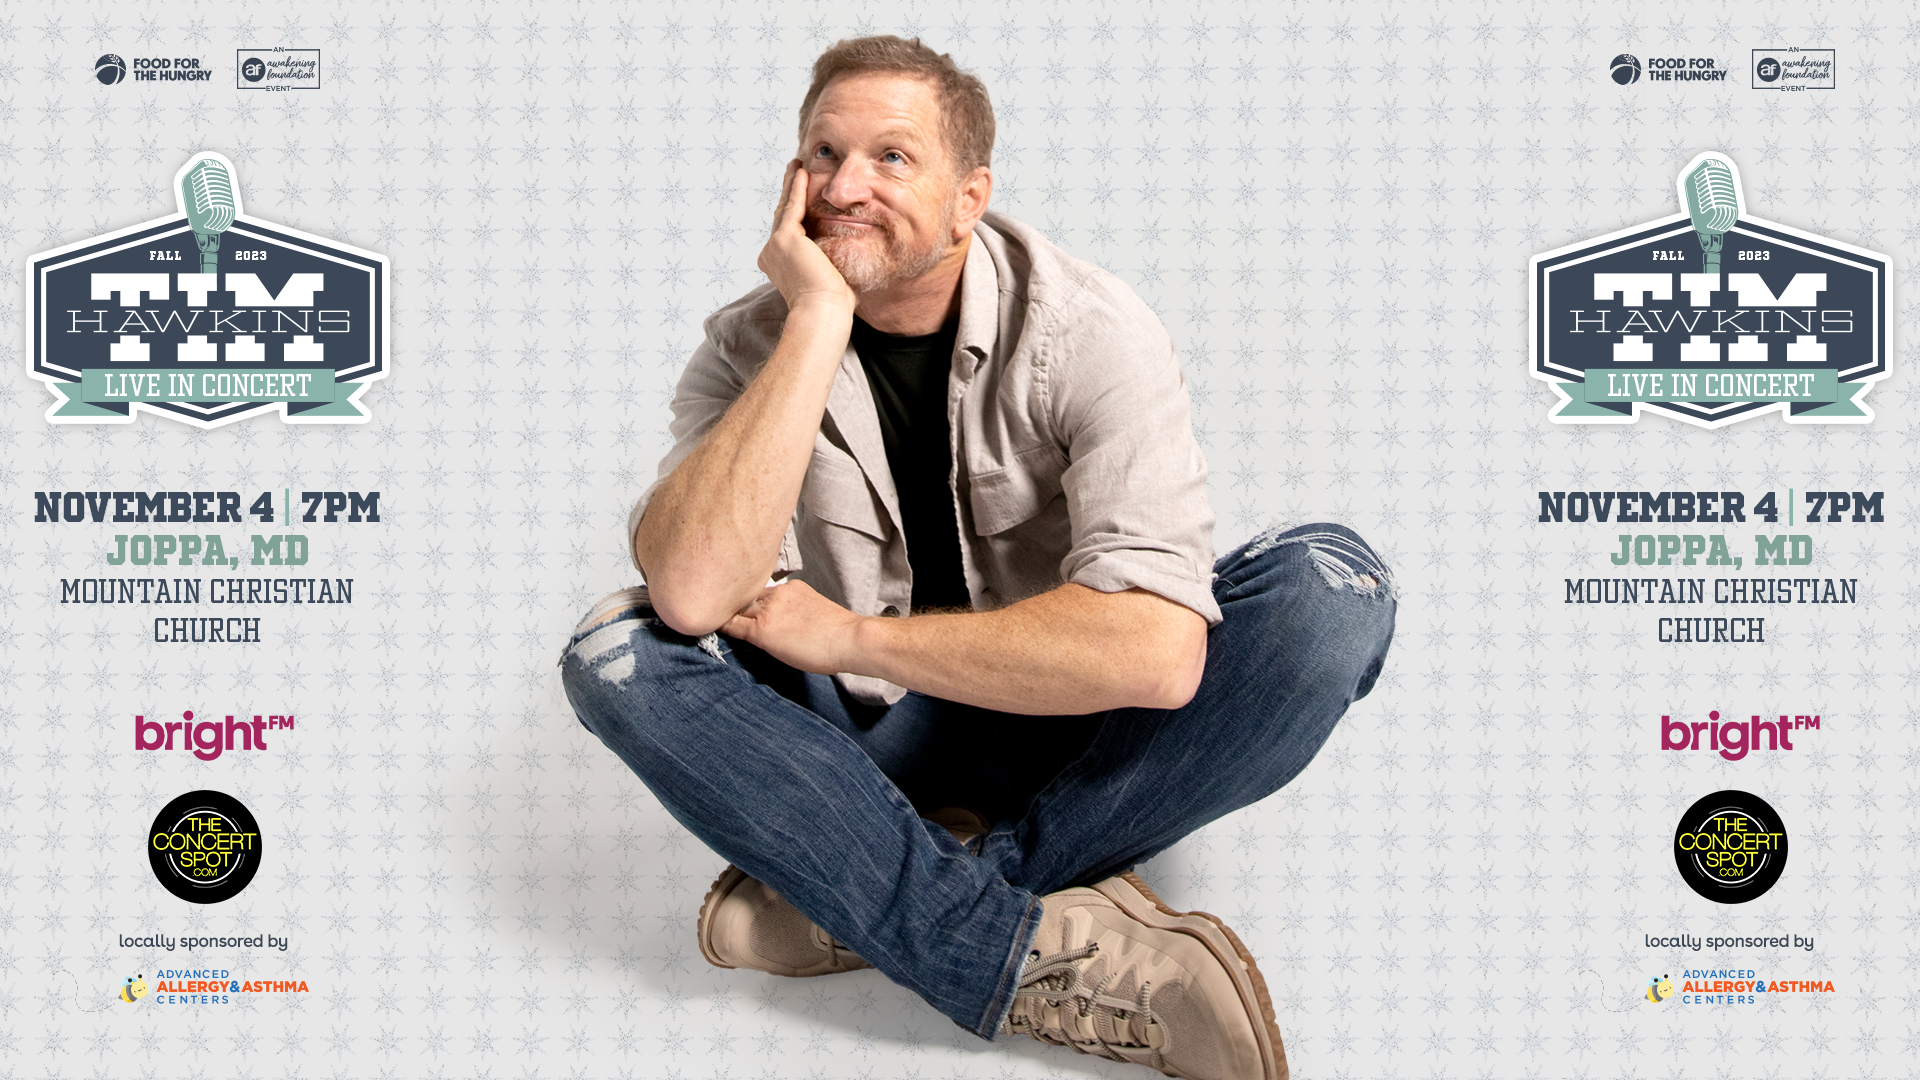 Tim Hawkins is coming to Joppa, MD on November 4th. Get your tickets today! Sponsored by Advanced Allergy & Asthma Centers